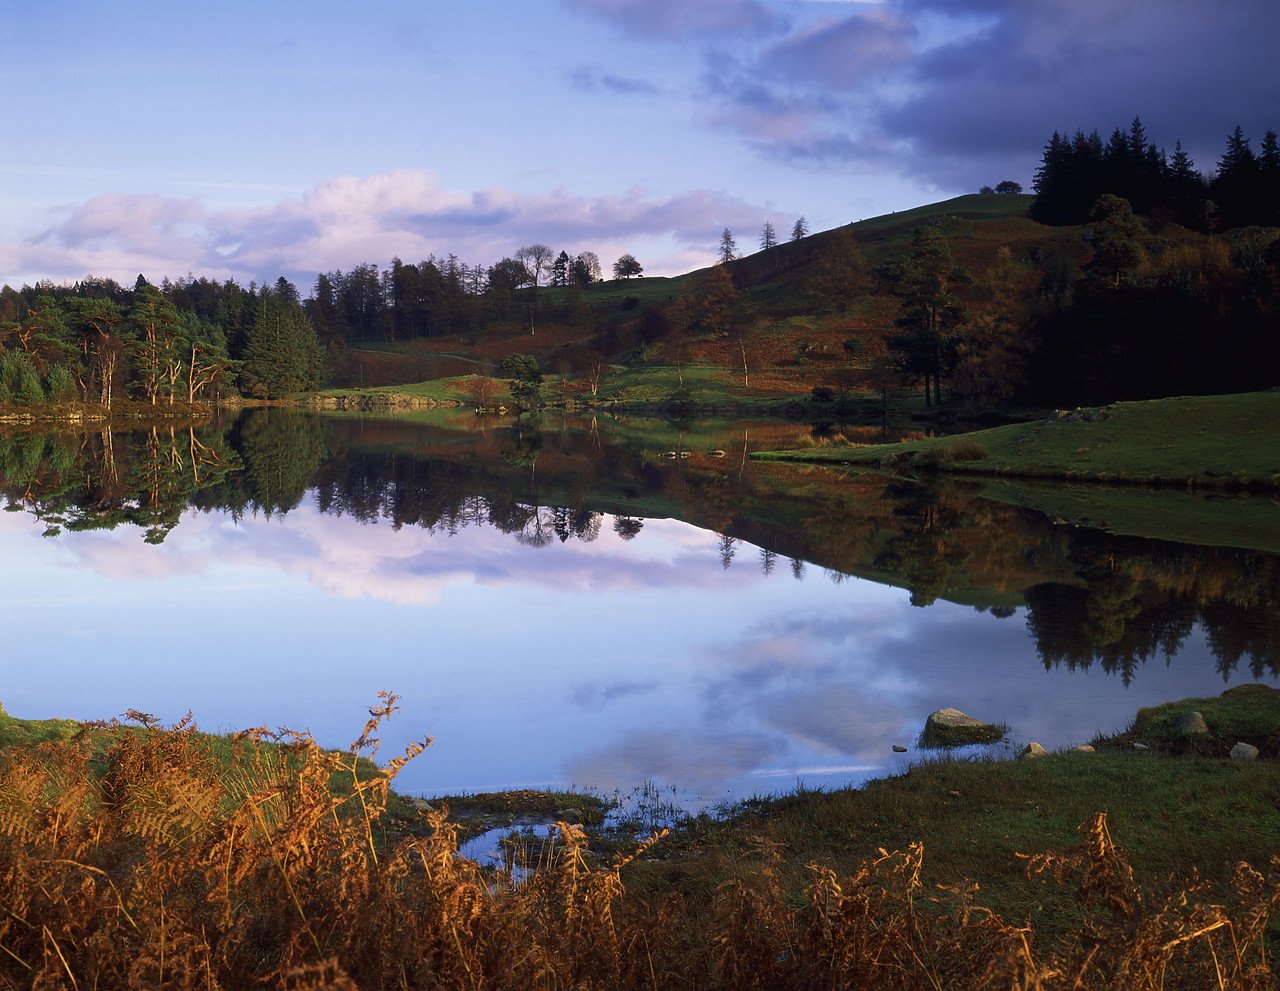 #980993-1 - Tarn Hows Reflections, Lake District National Park, Cumbria, England